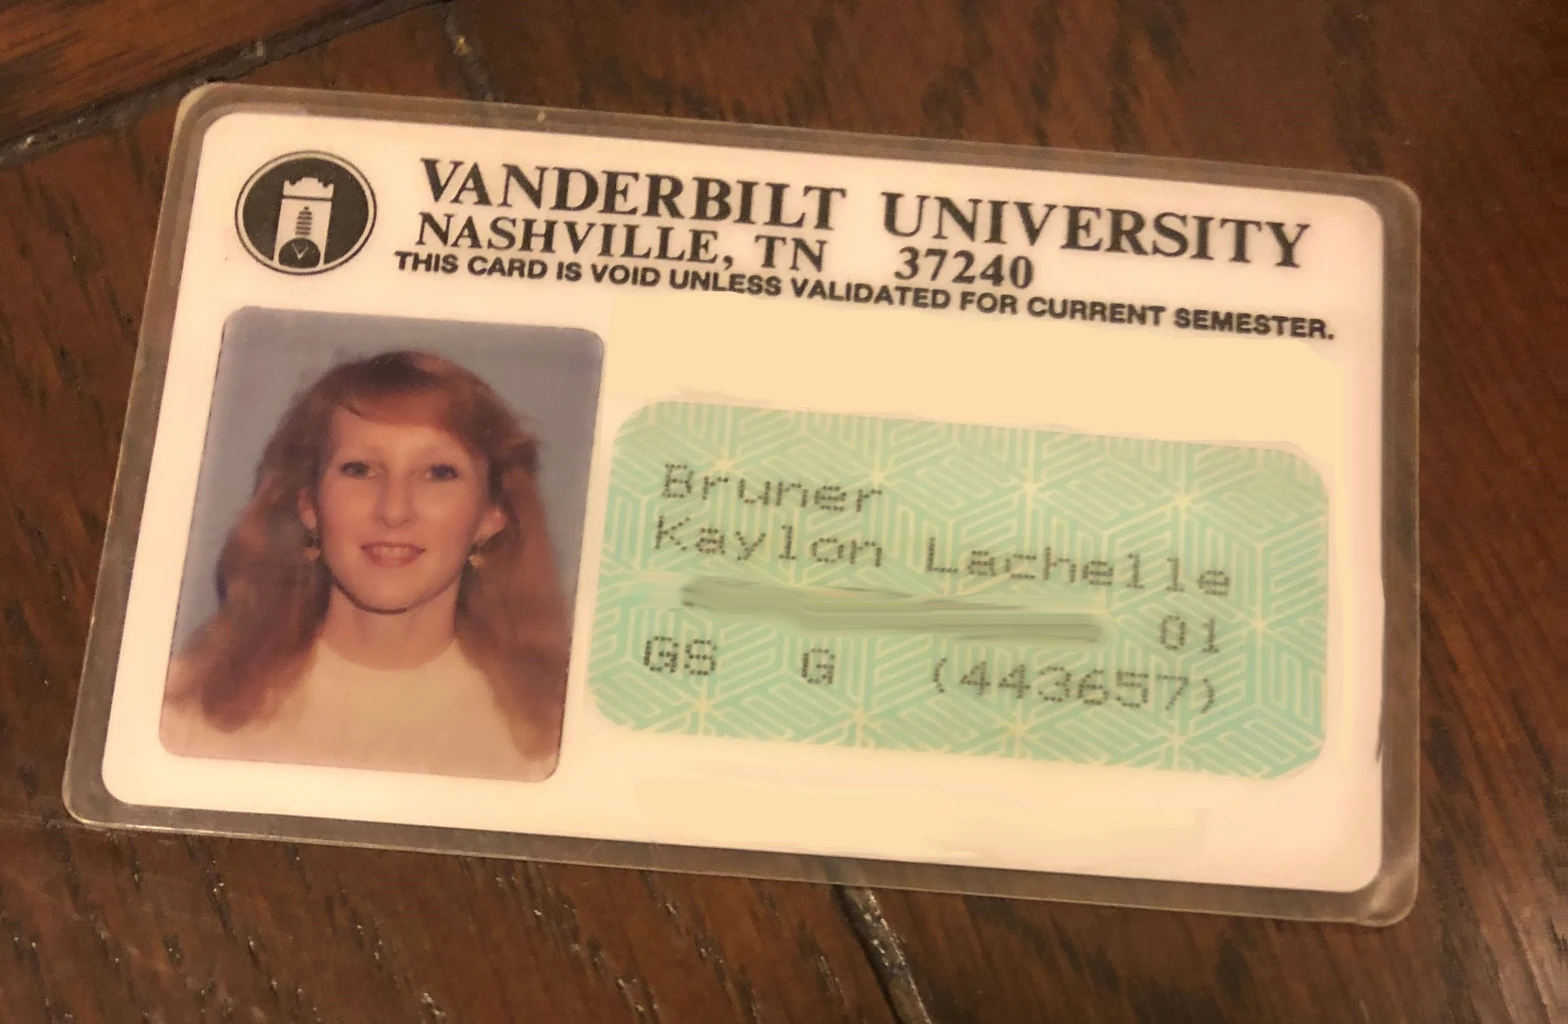 The Vanderbilt University ID I was issued in 1992. I have blurred out my social security number. Identity theft wasn’t a thing back then.